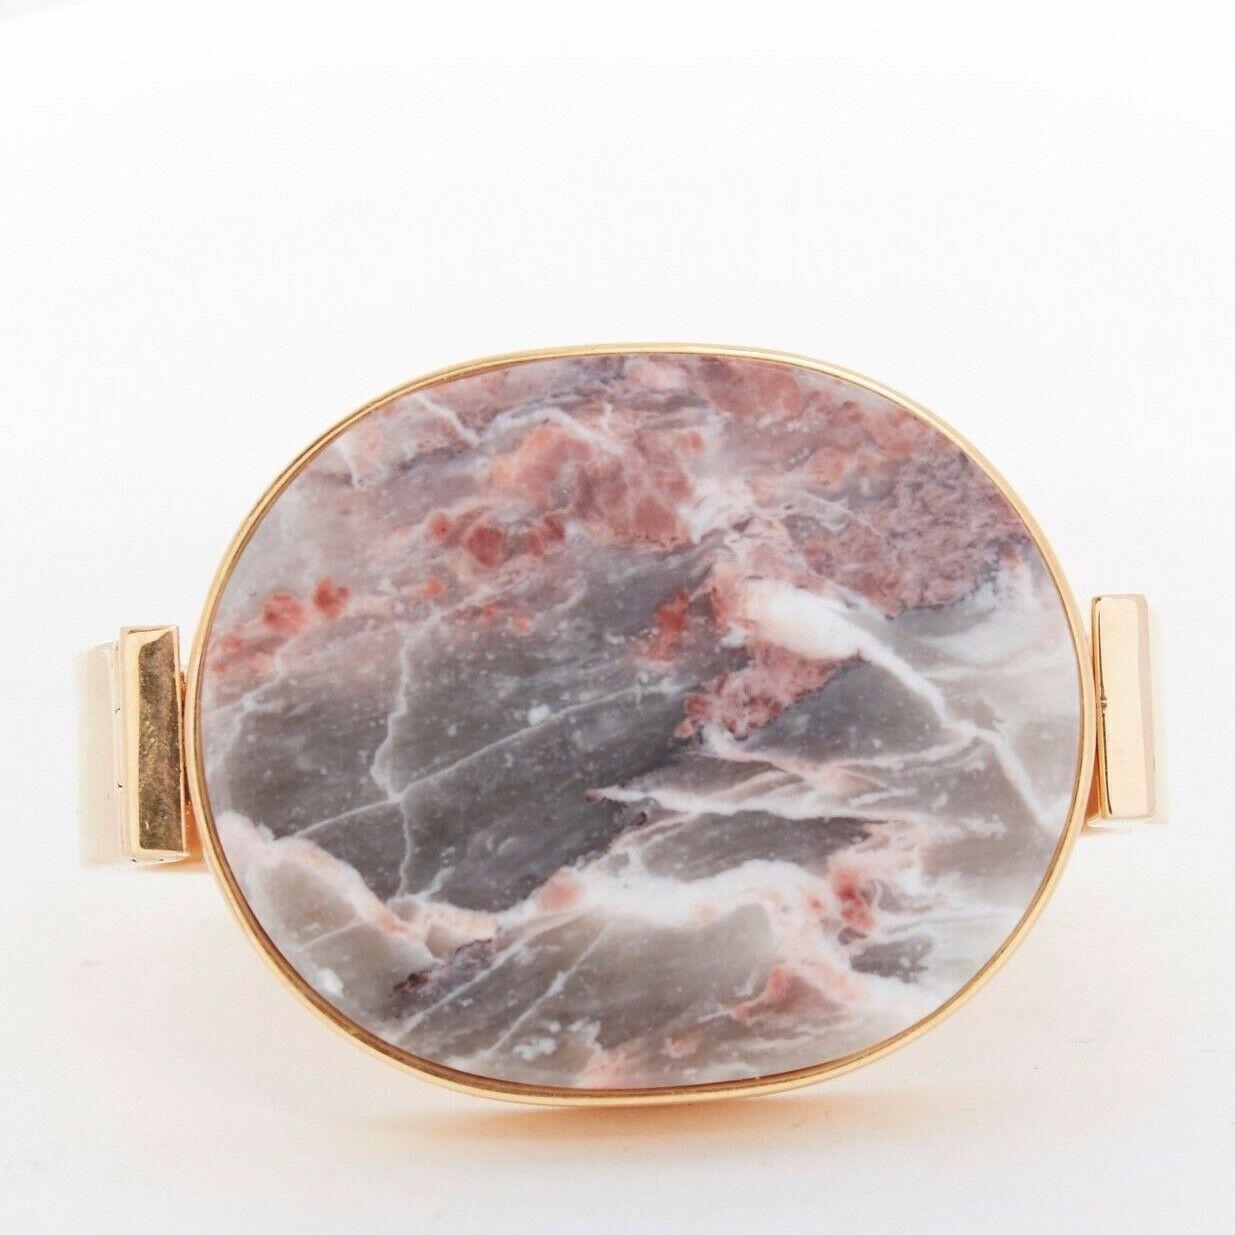 CELINE pink grey signet marble stone face gold-tone metal bracelet cuff bangle S

CELINE BY PHOEBE PHILO
Signet bangle. Grey and pink marble stone face. Gold-tone metal. Clasp closure. Signed Celine Made in Italy.

CONDITION
Very good, this item was